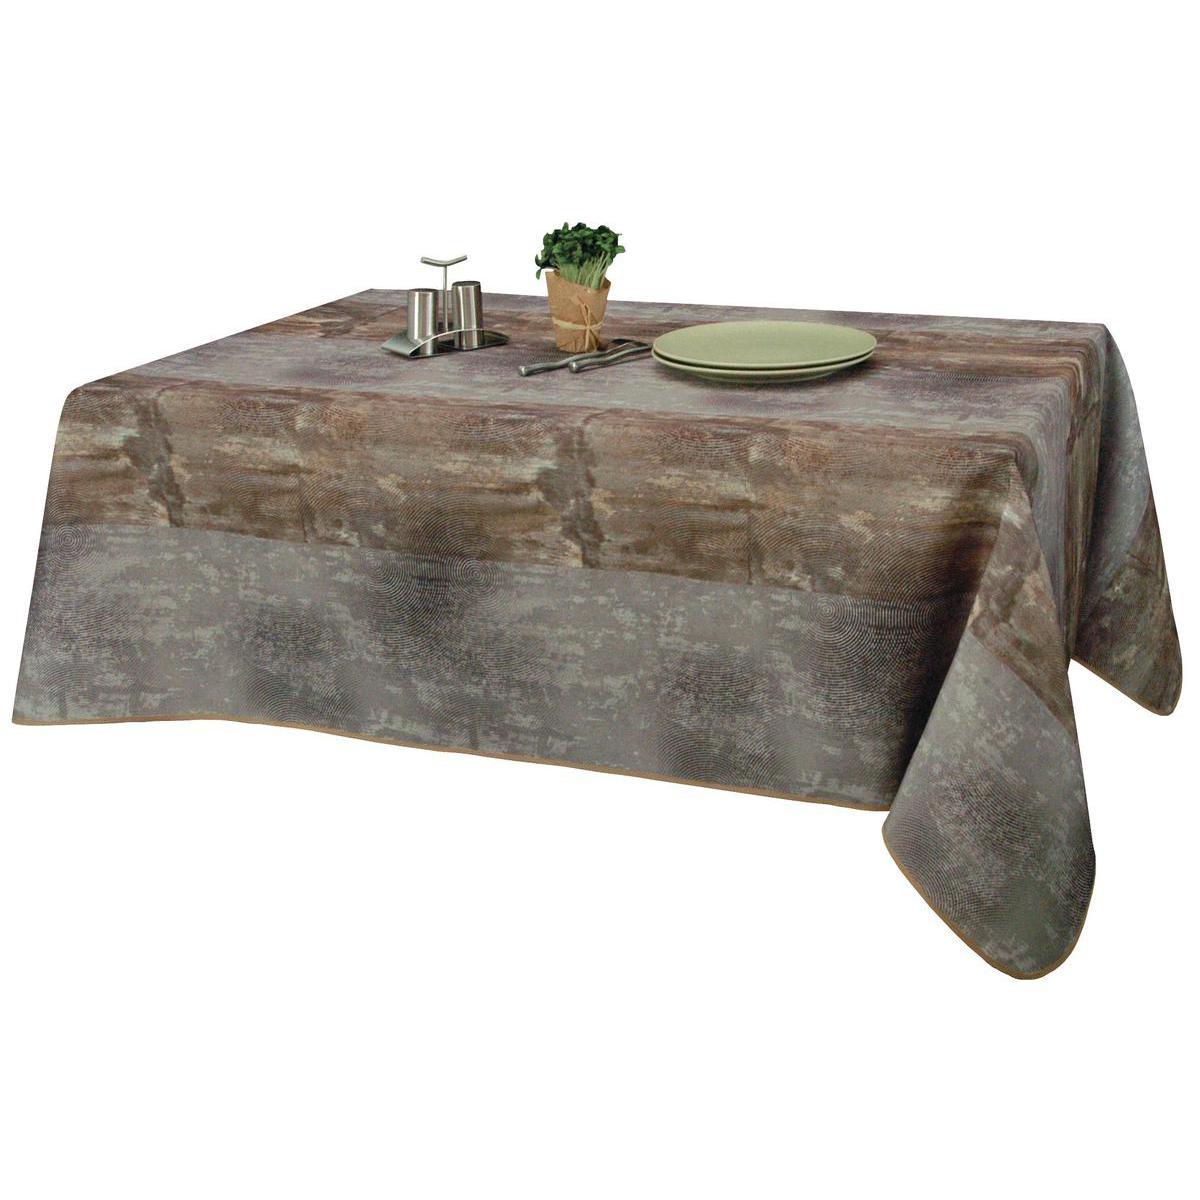 Nappe rectangulaire - Polyester -145 x 300 cm - Gris